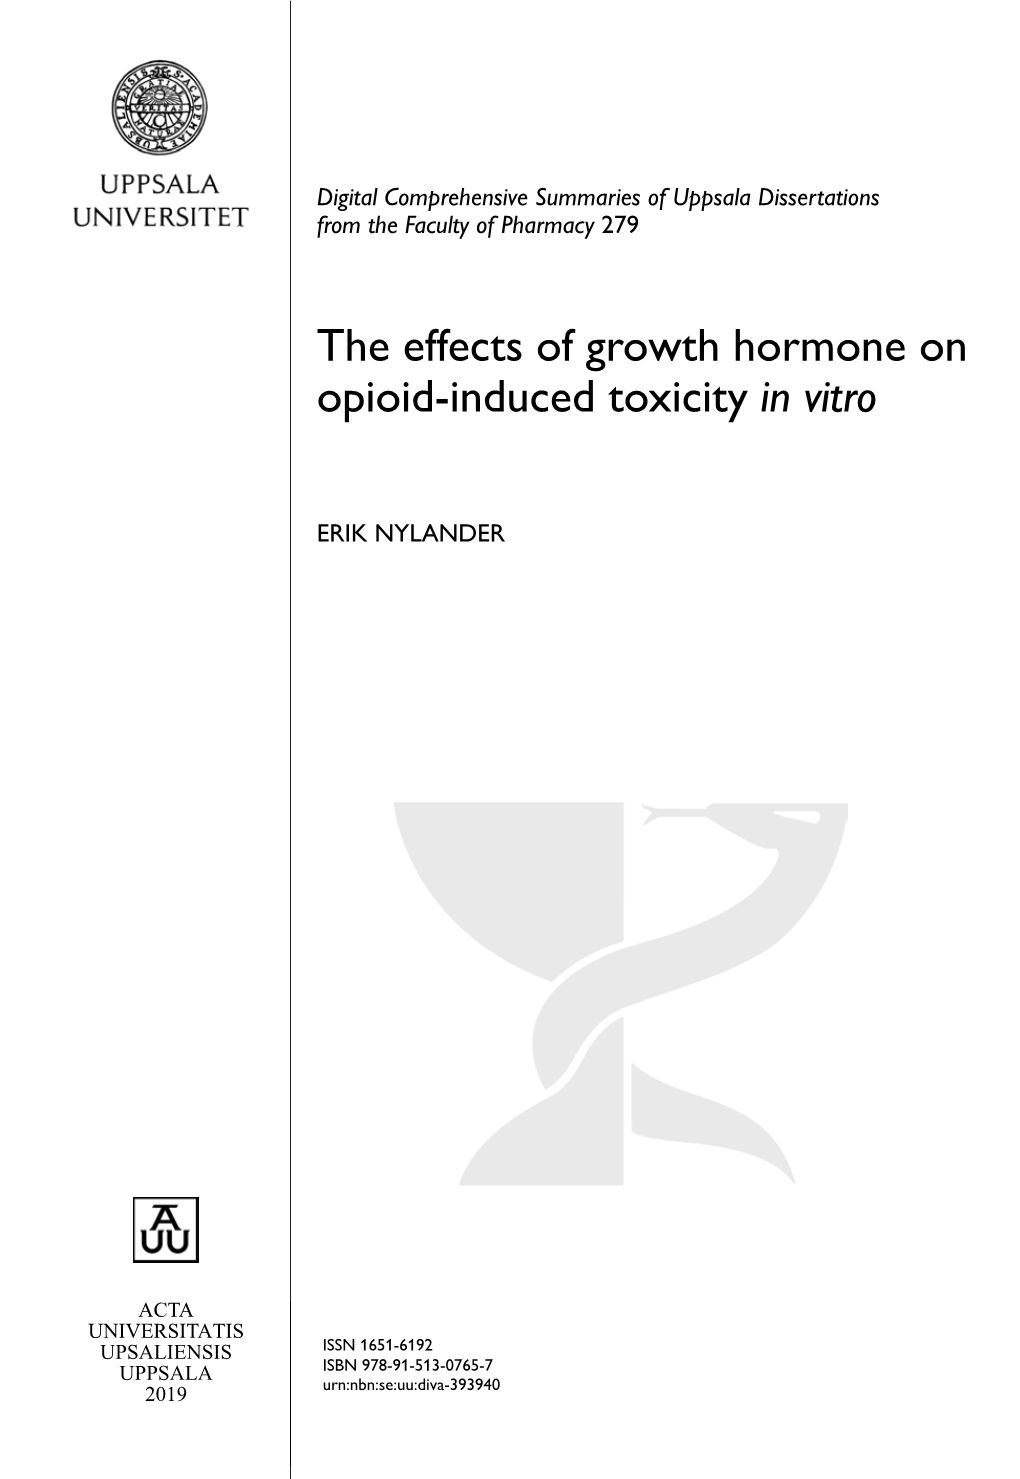 The Effects of Growth Hormone on Opioid-Induced Toxicity in Vitro